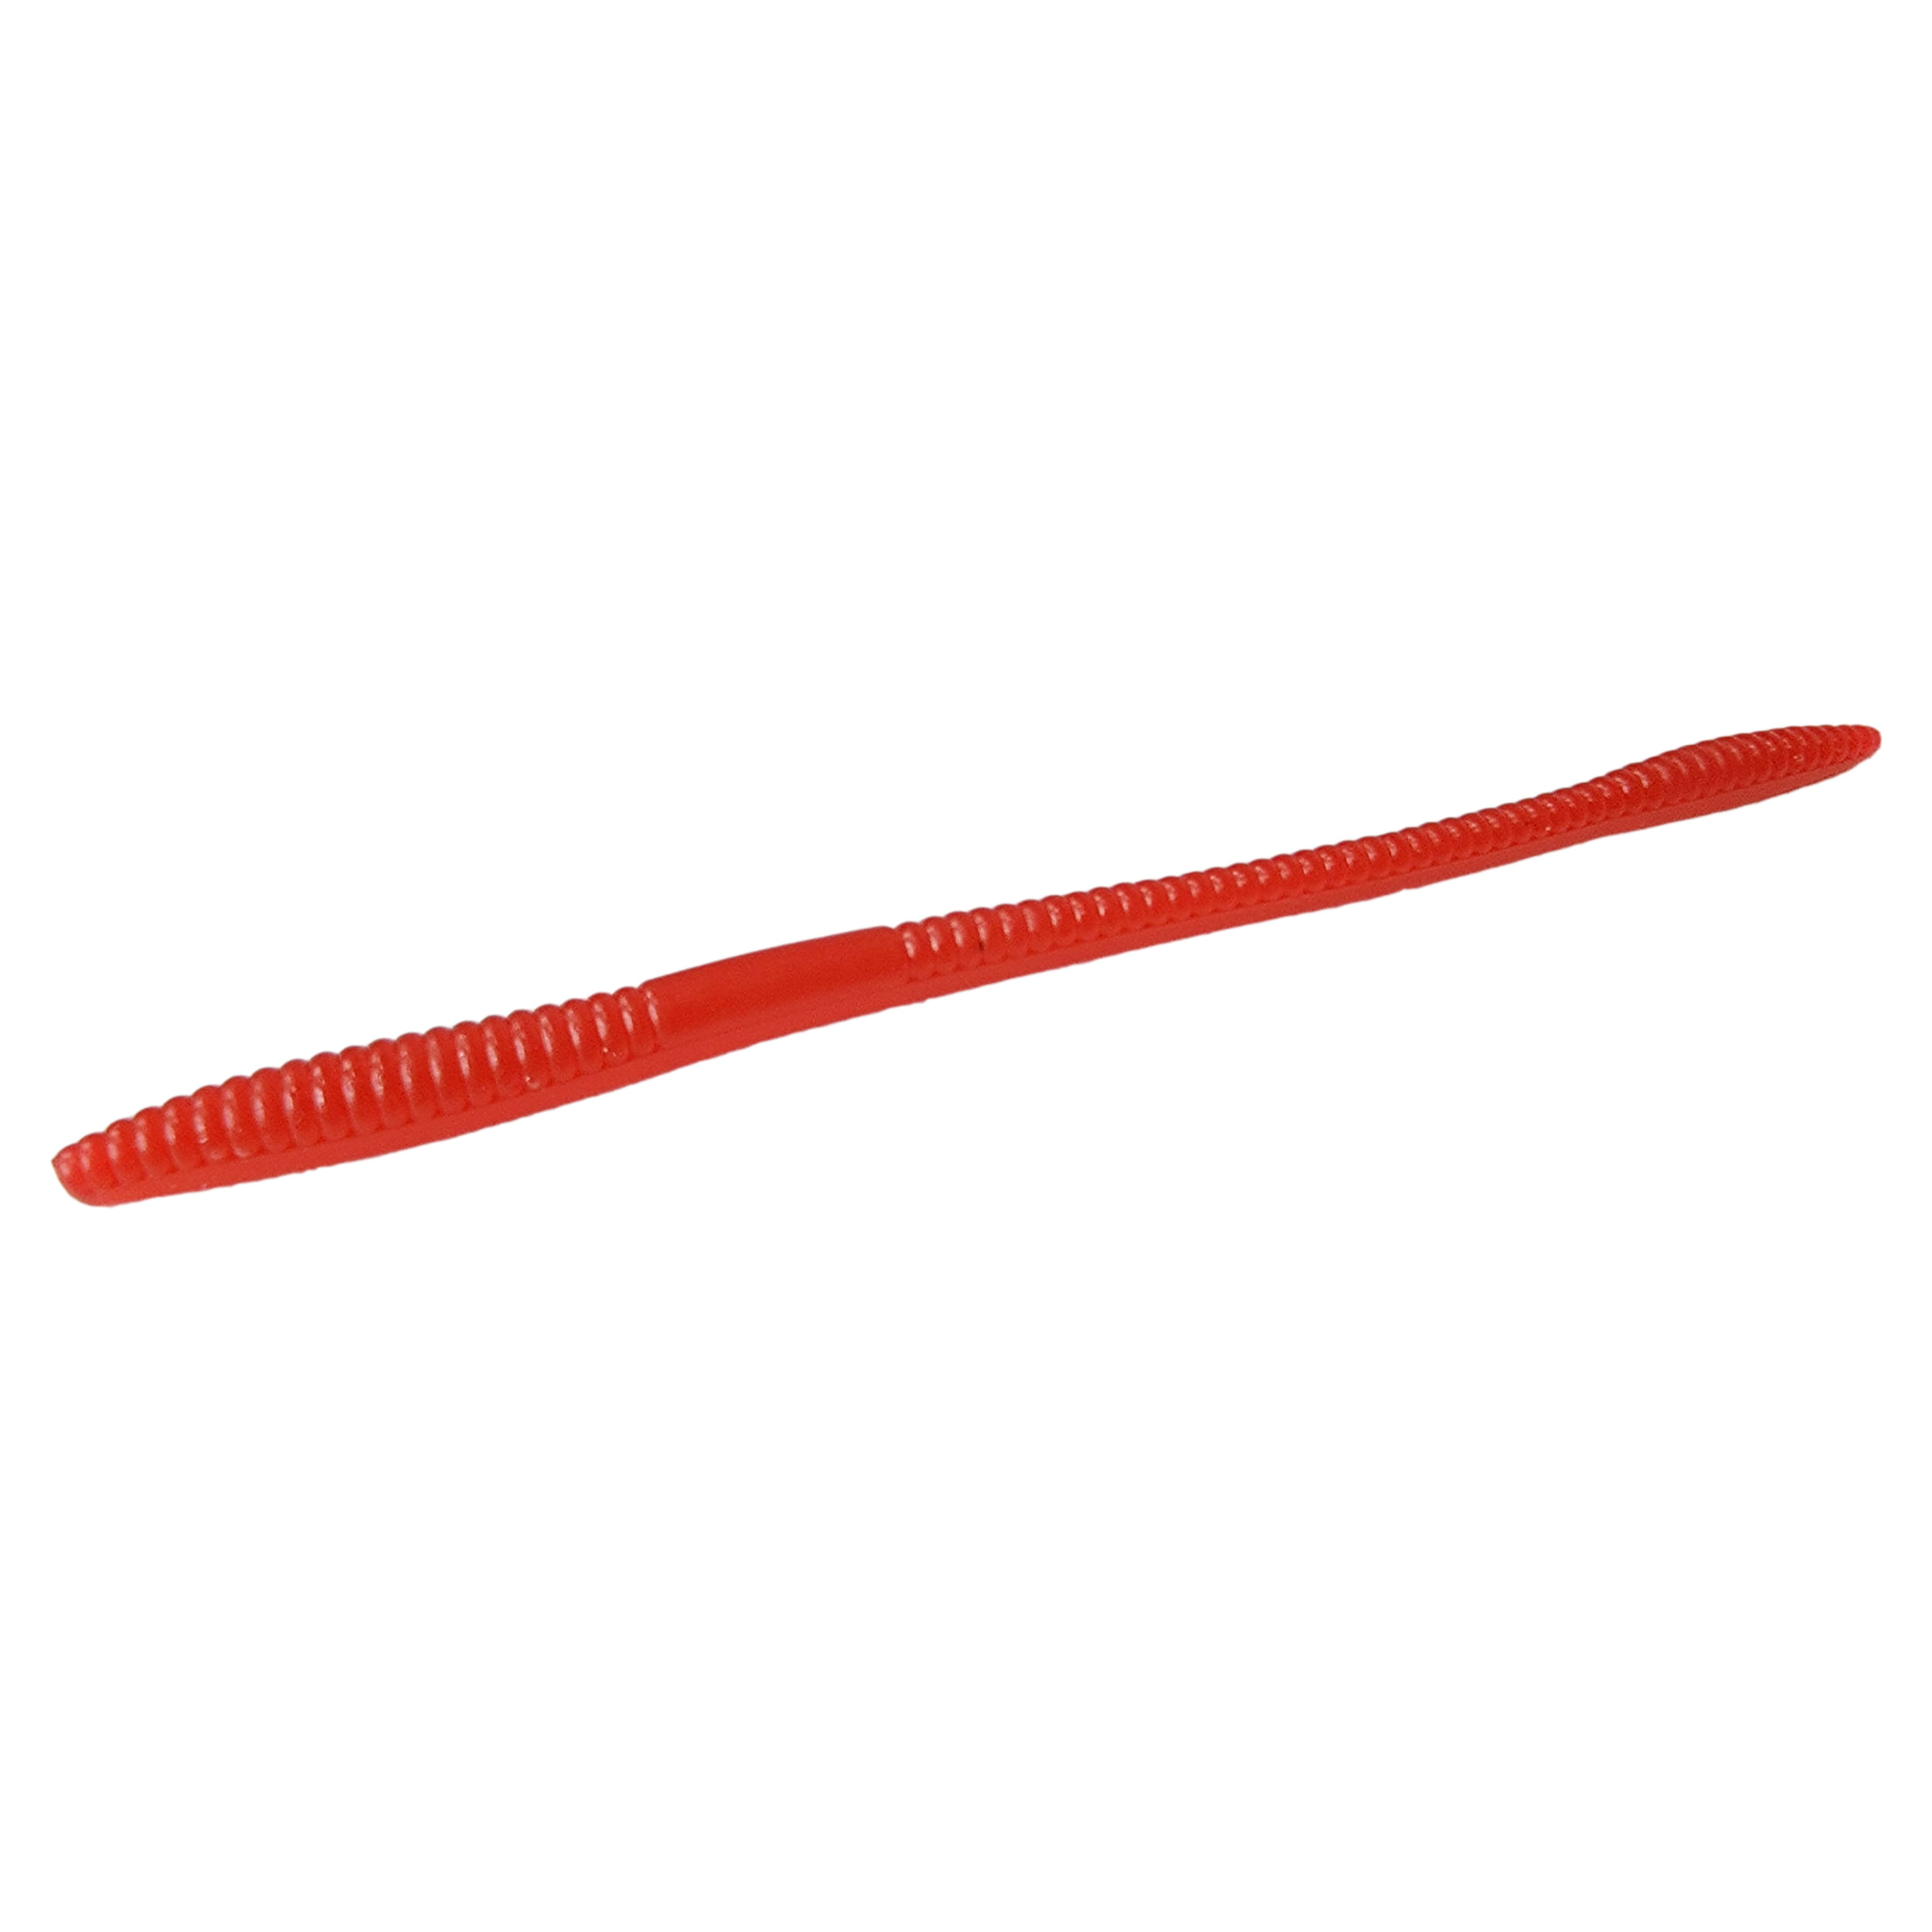 Tackle HD Sweet Stick Worm 7.5-Inch 20-Pack - Louisiana Red